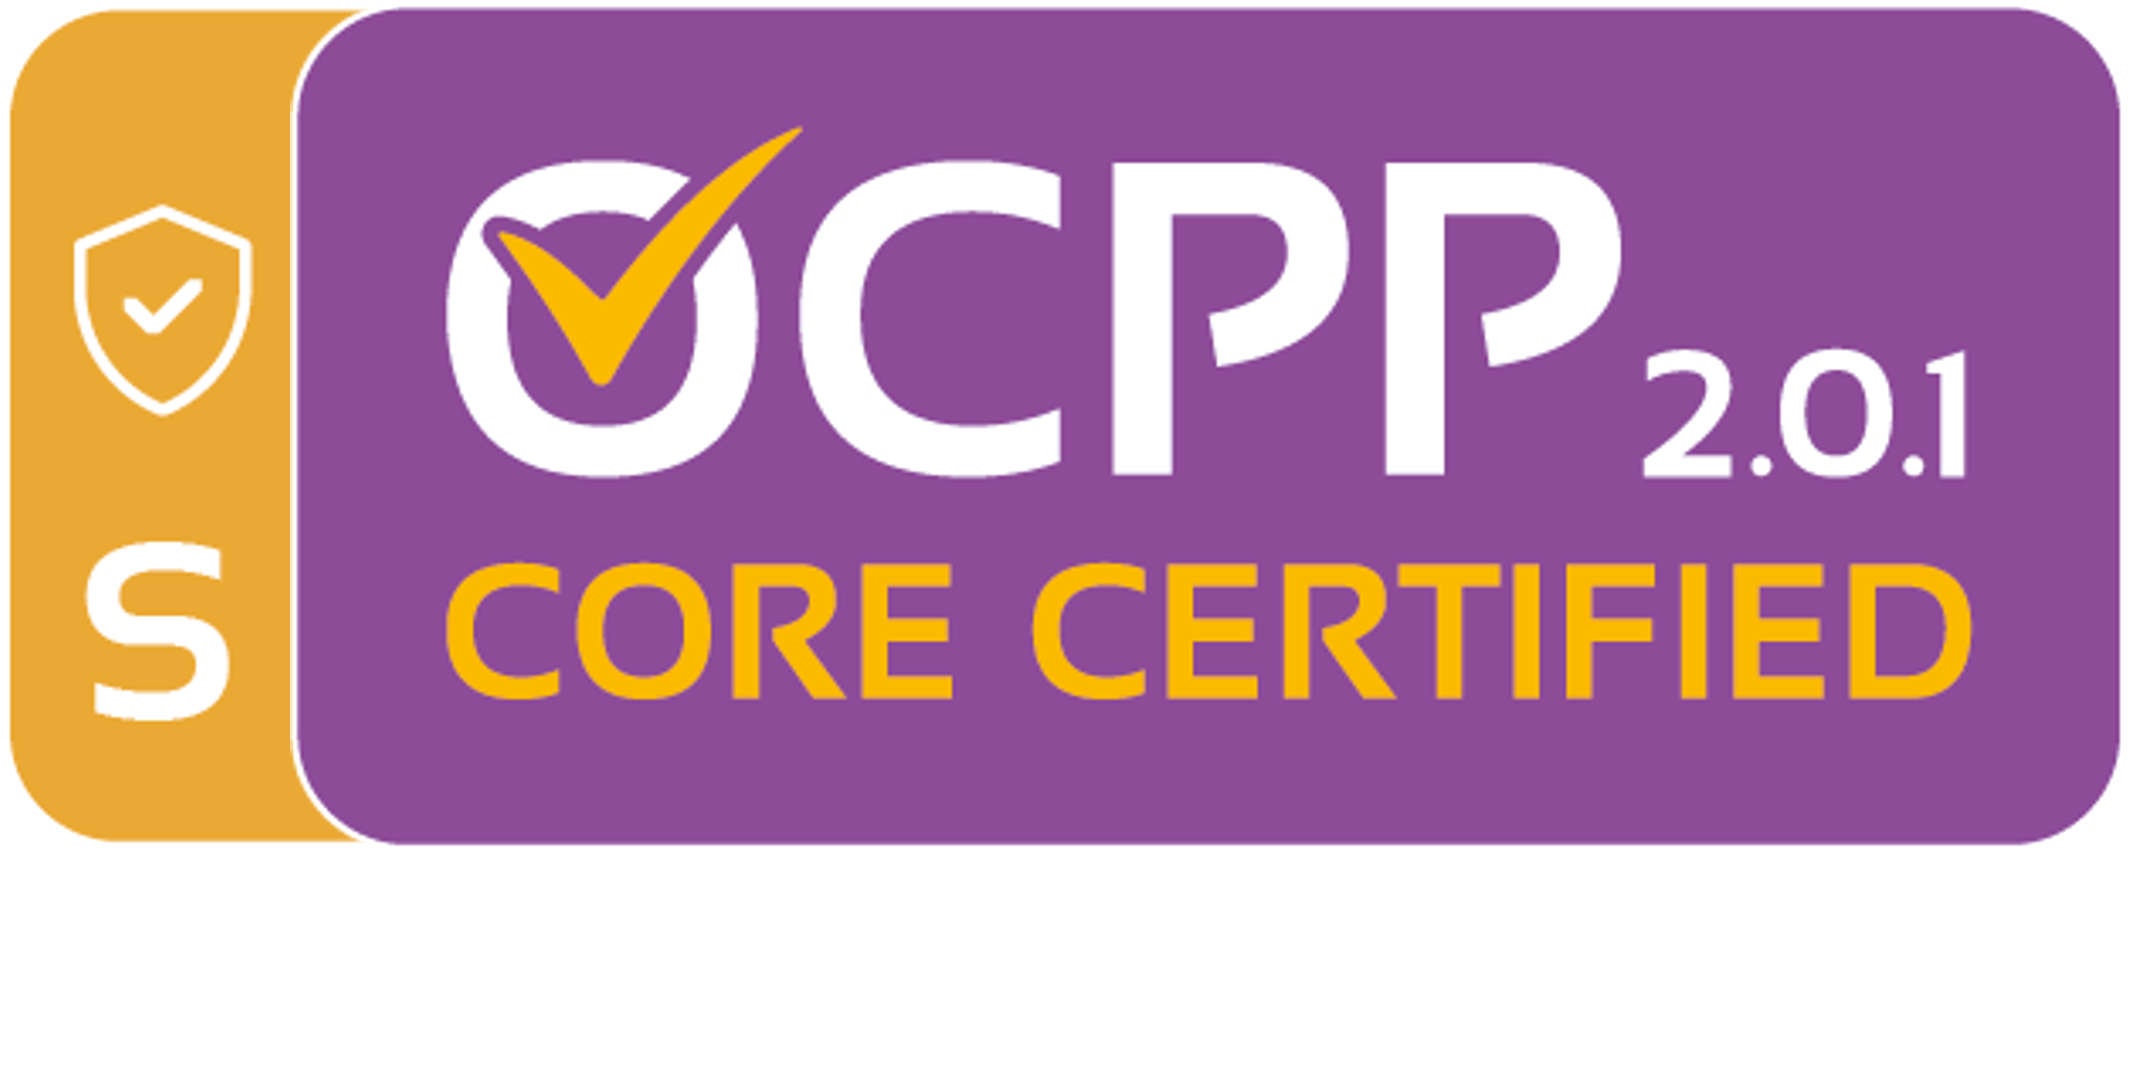 OCPP Core and Advanced Security Certification Logo